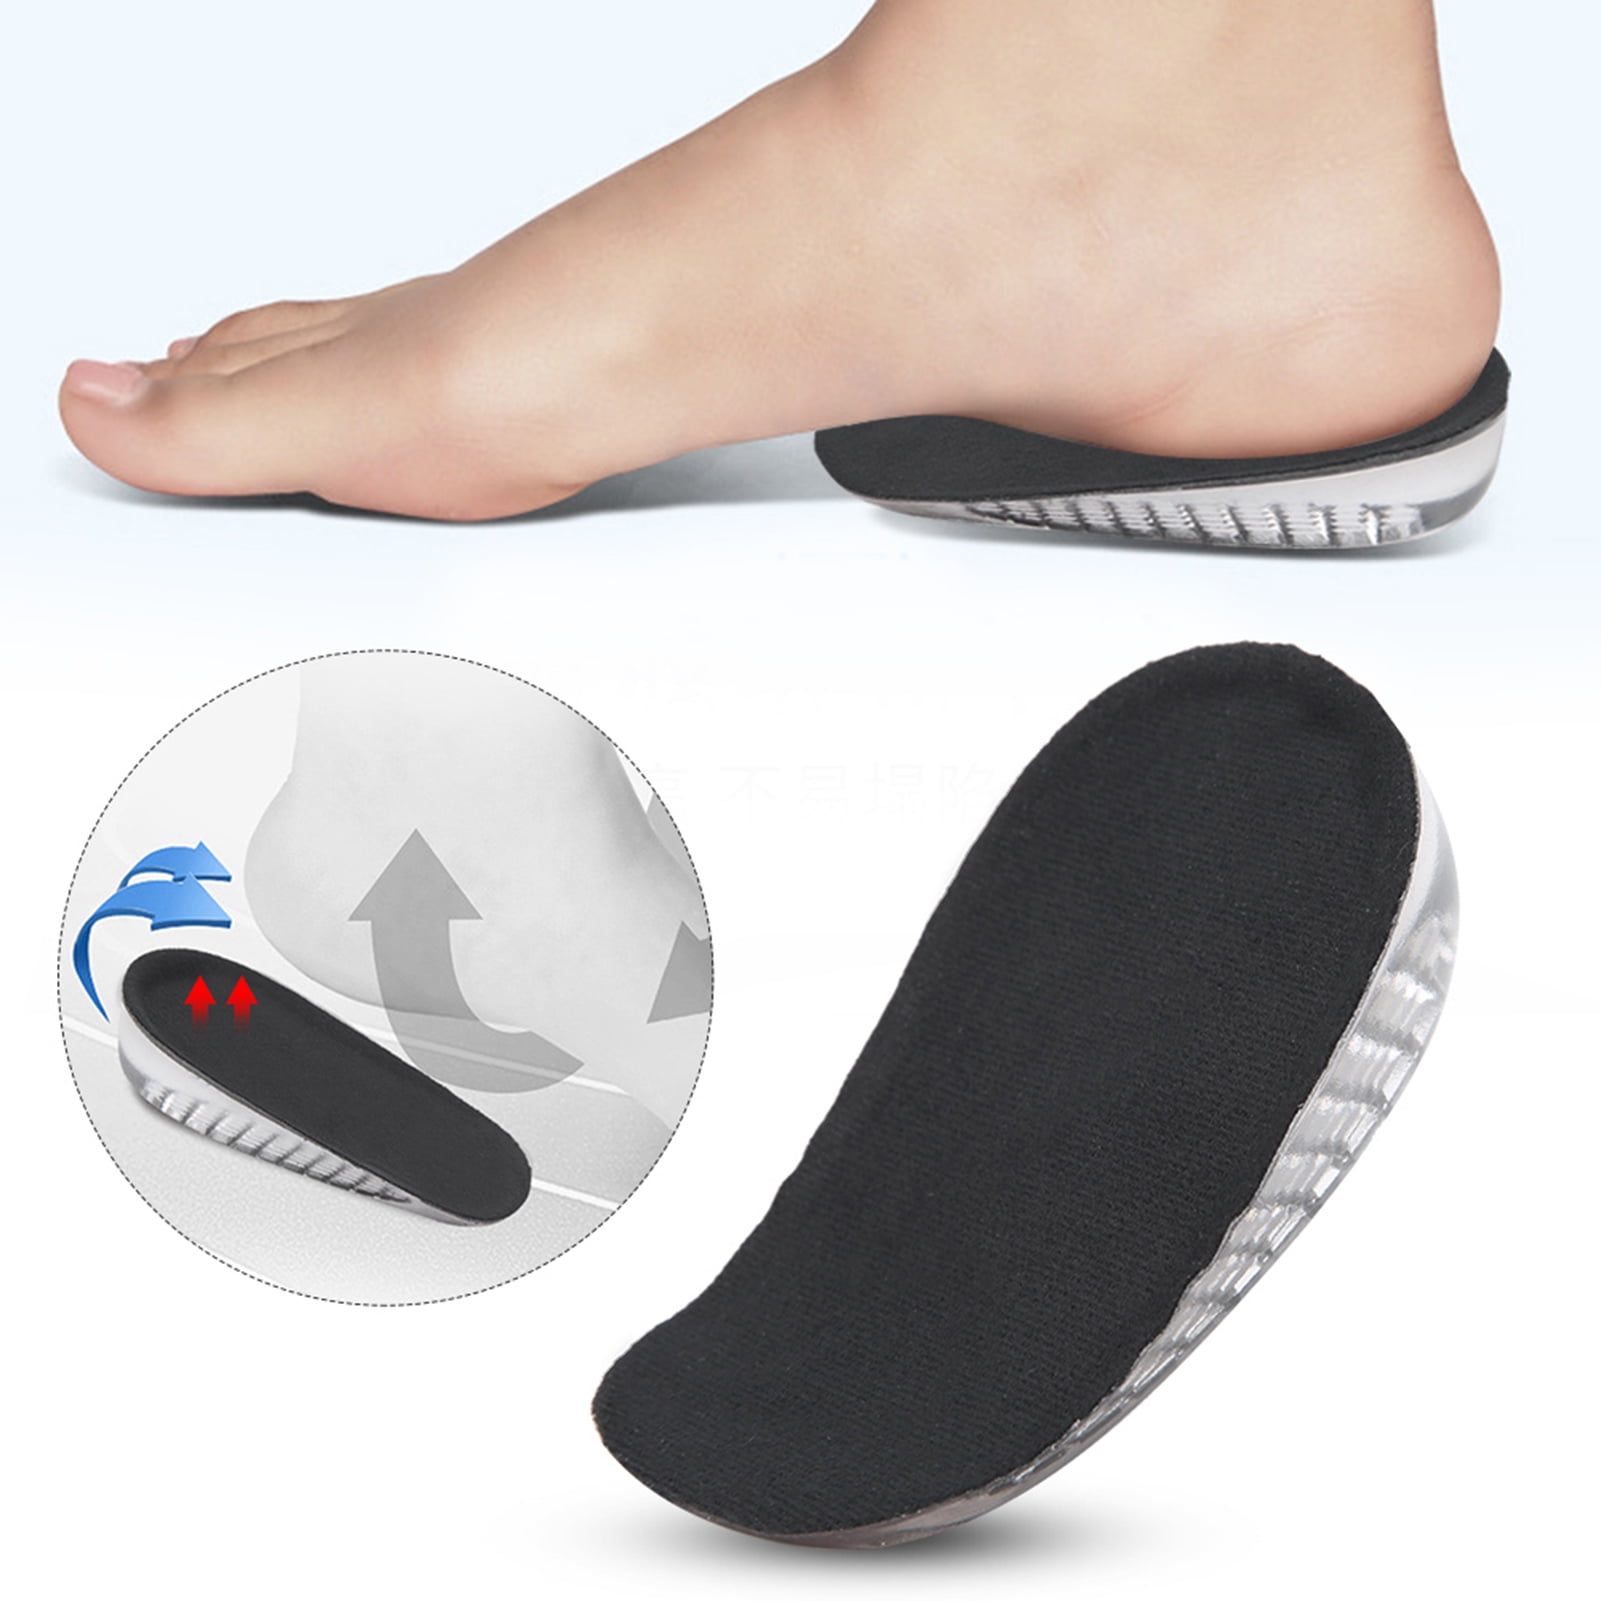 Soft Silica Gel Reduce Pain Insoles height Increasing For Man and Women 